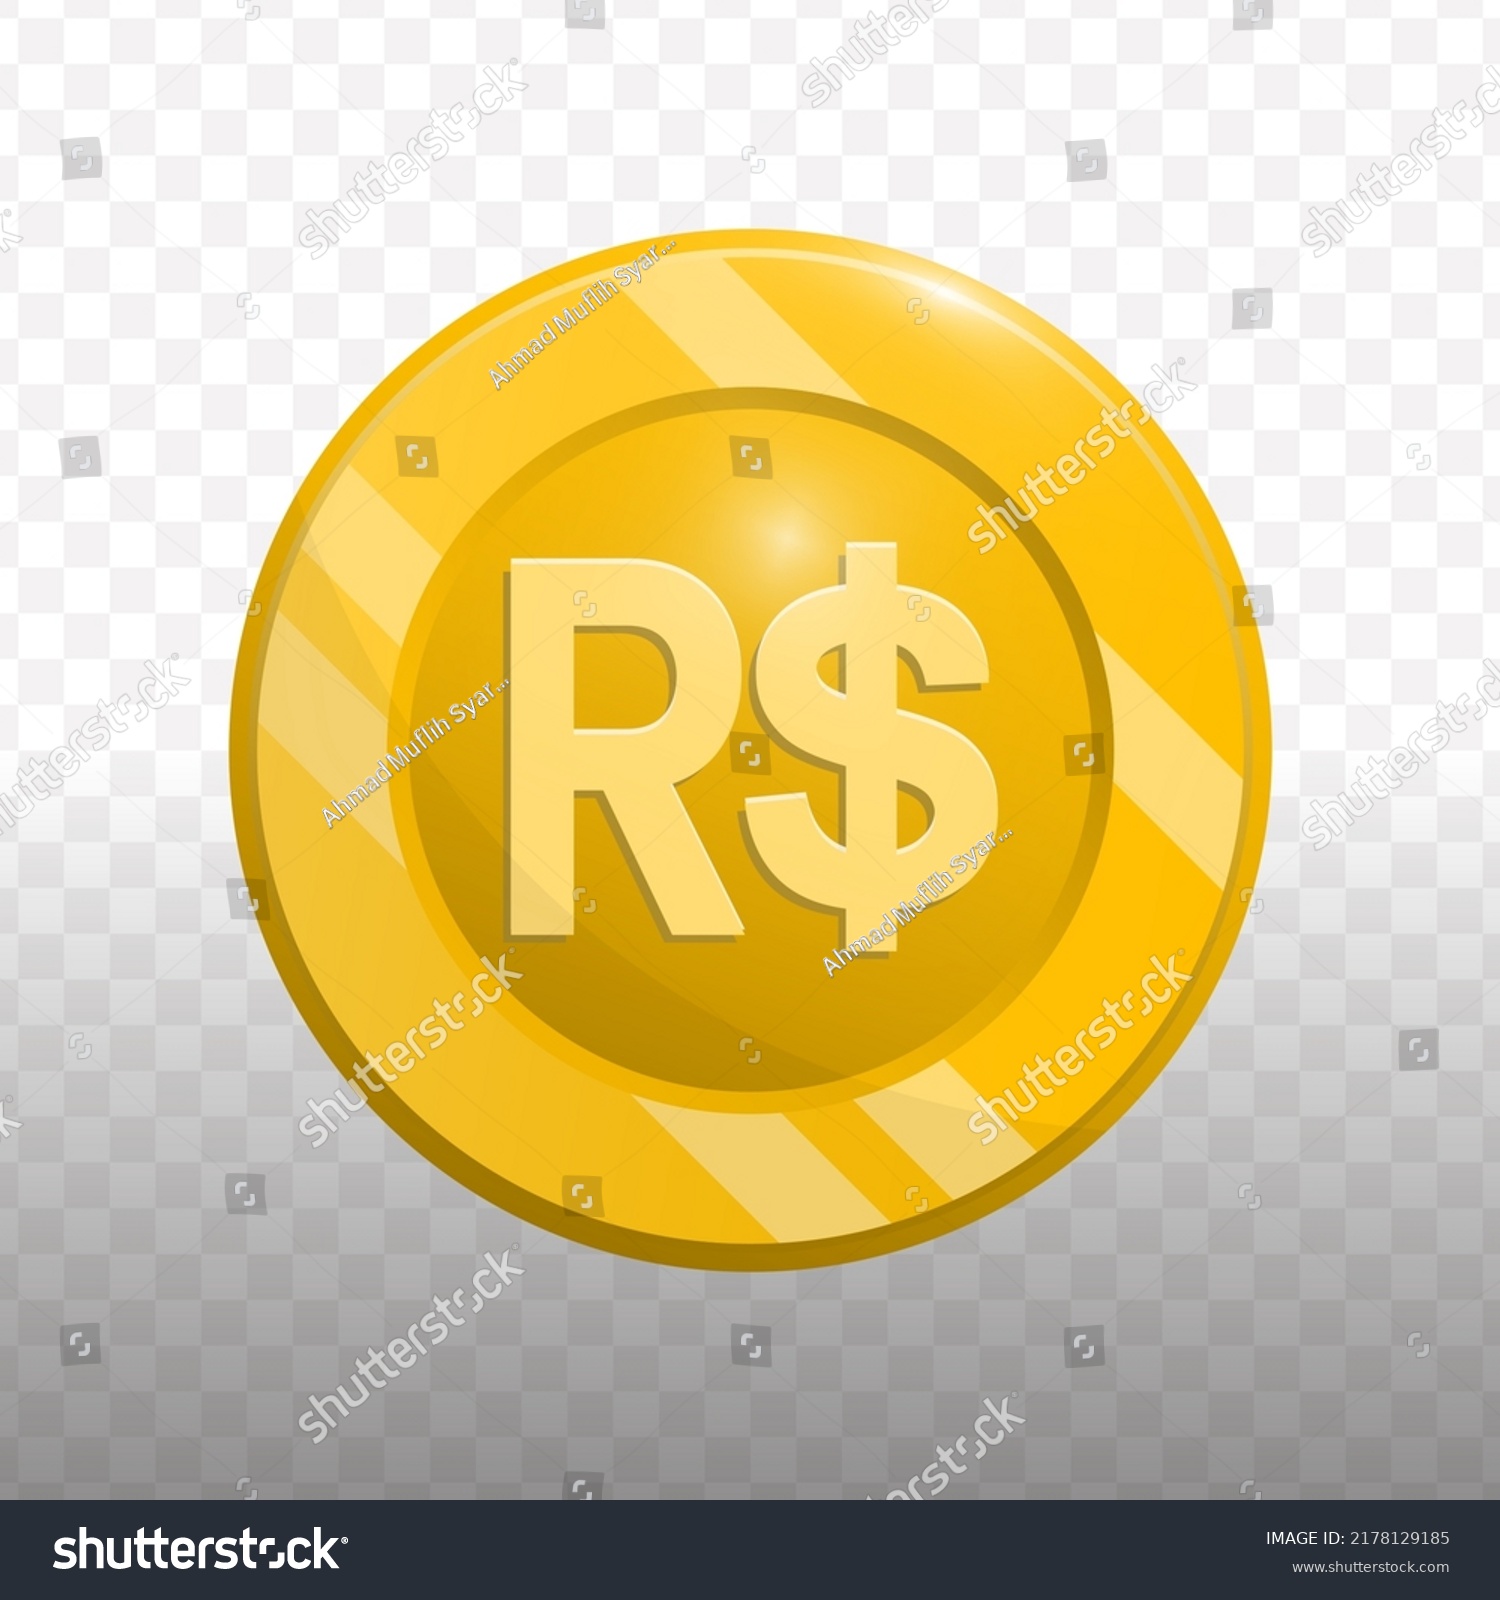 SVG of Vector illustration of Real Brazil currency coin in gold color on transparent background (PNG). svg